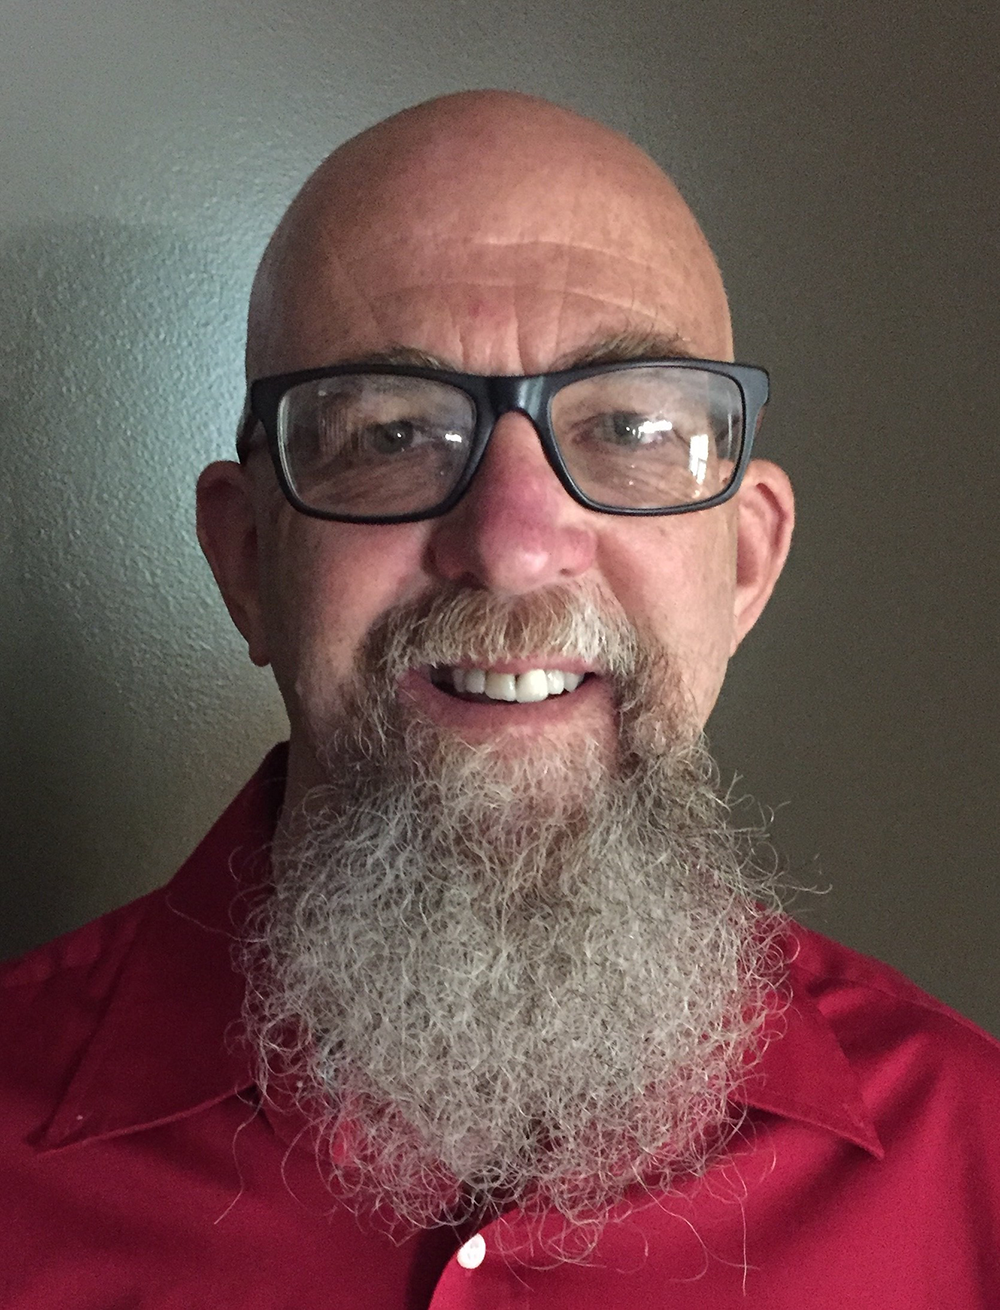 Harper Corporation of America Welcomes Darris Smith to the Harper GraphicSolutions Team